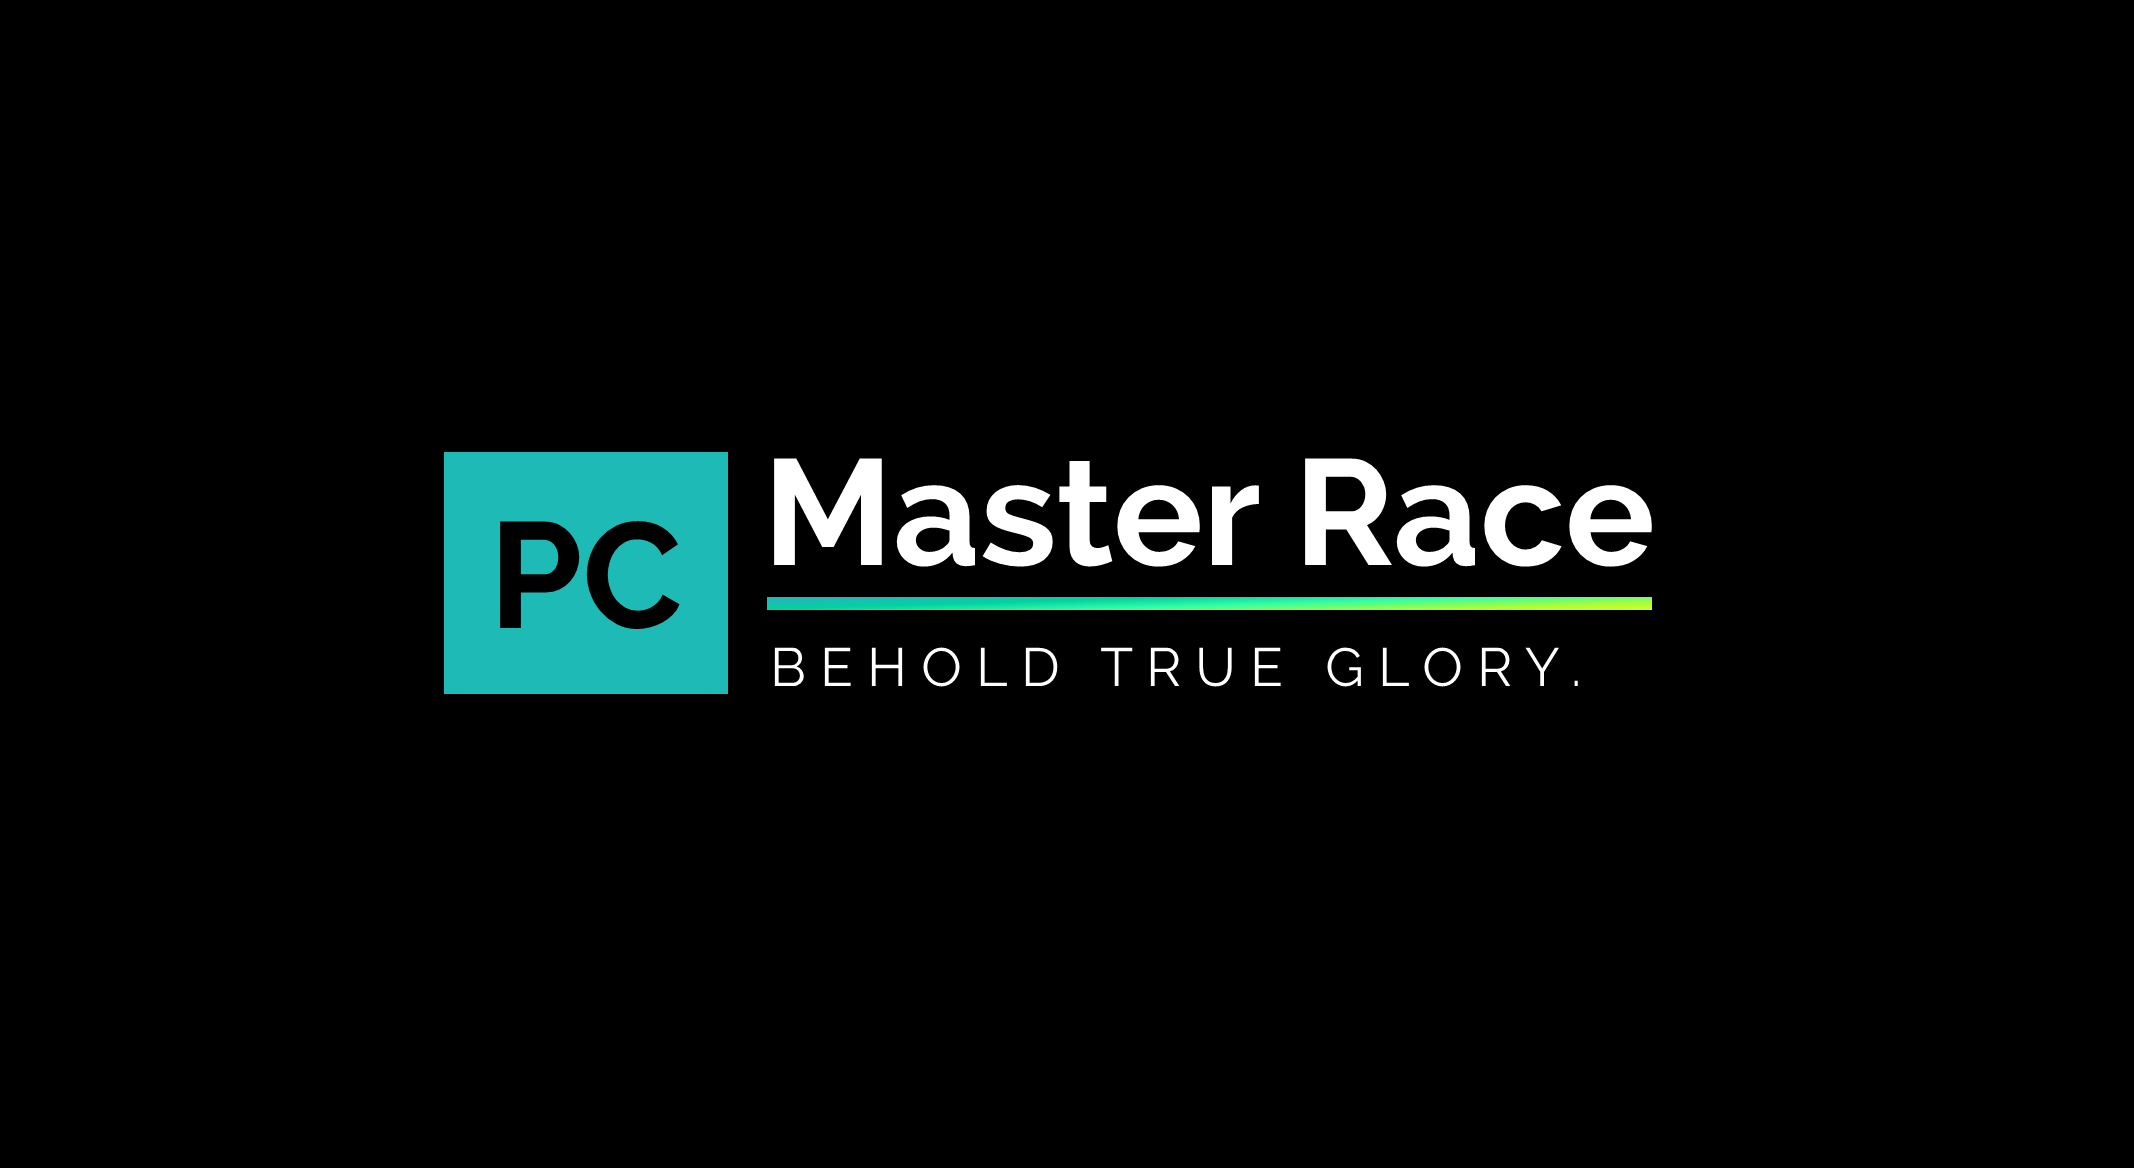 PC Master Race Simple Typography Black Background Humor Turquoise 2134x1169